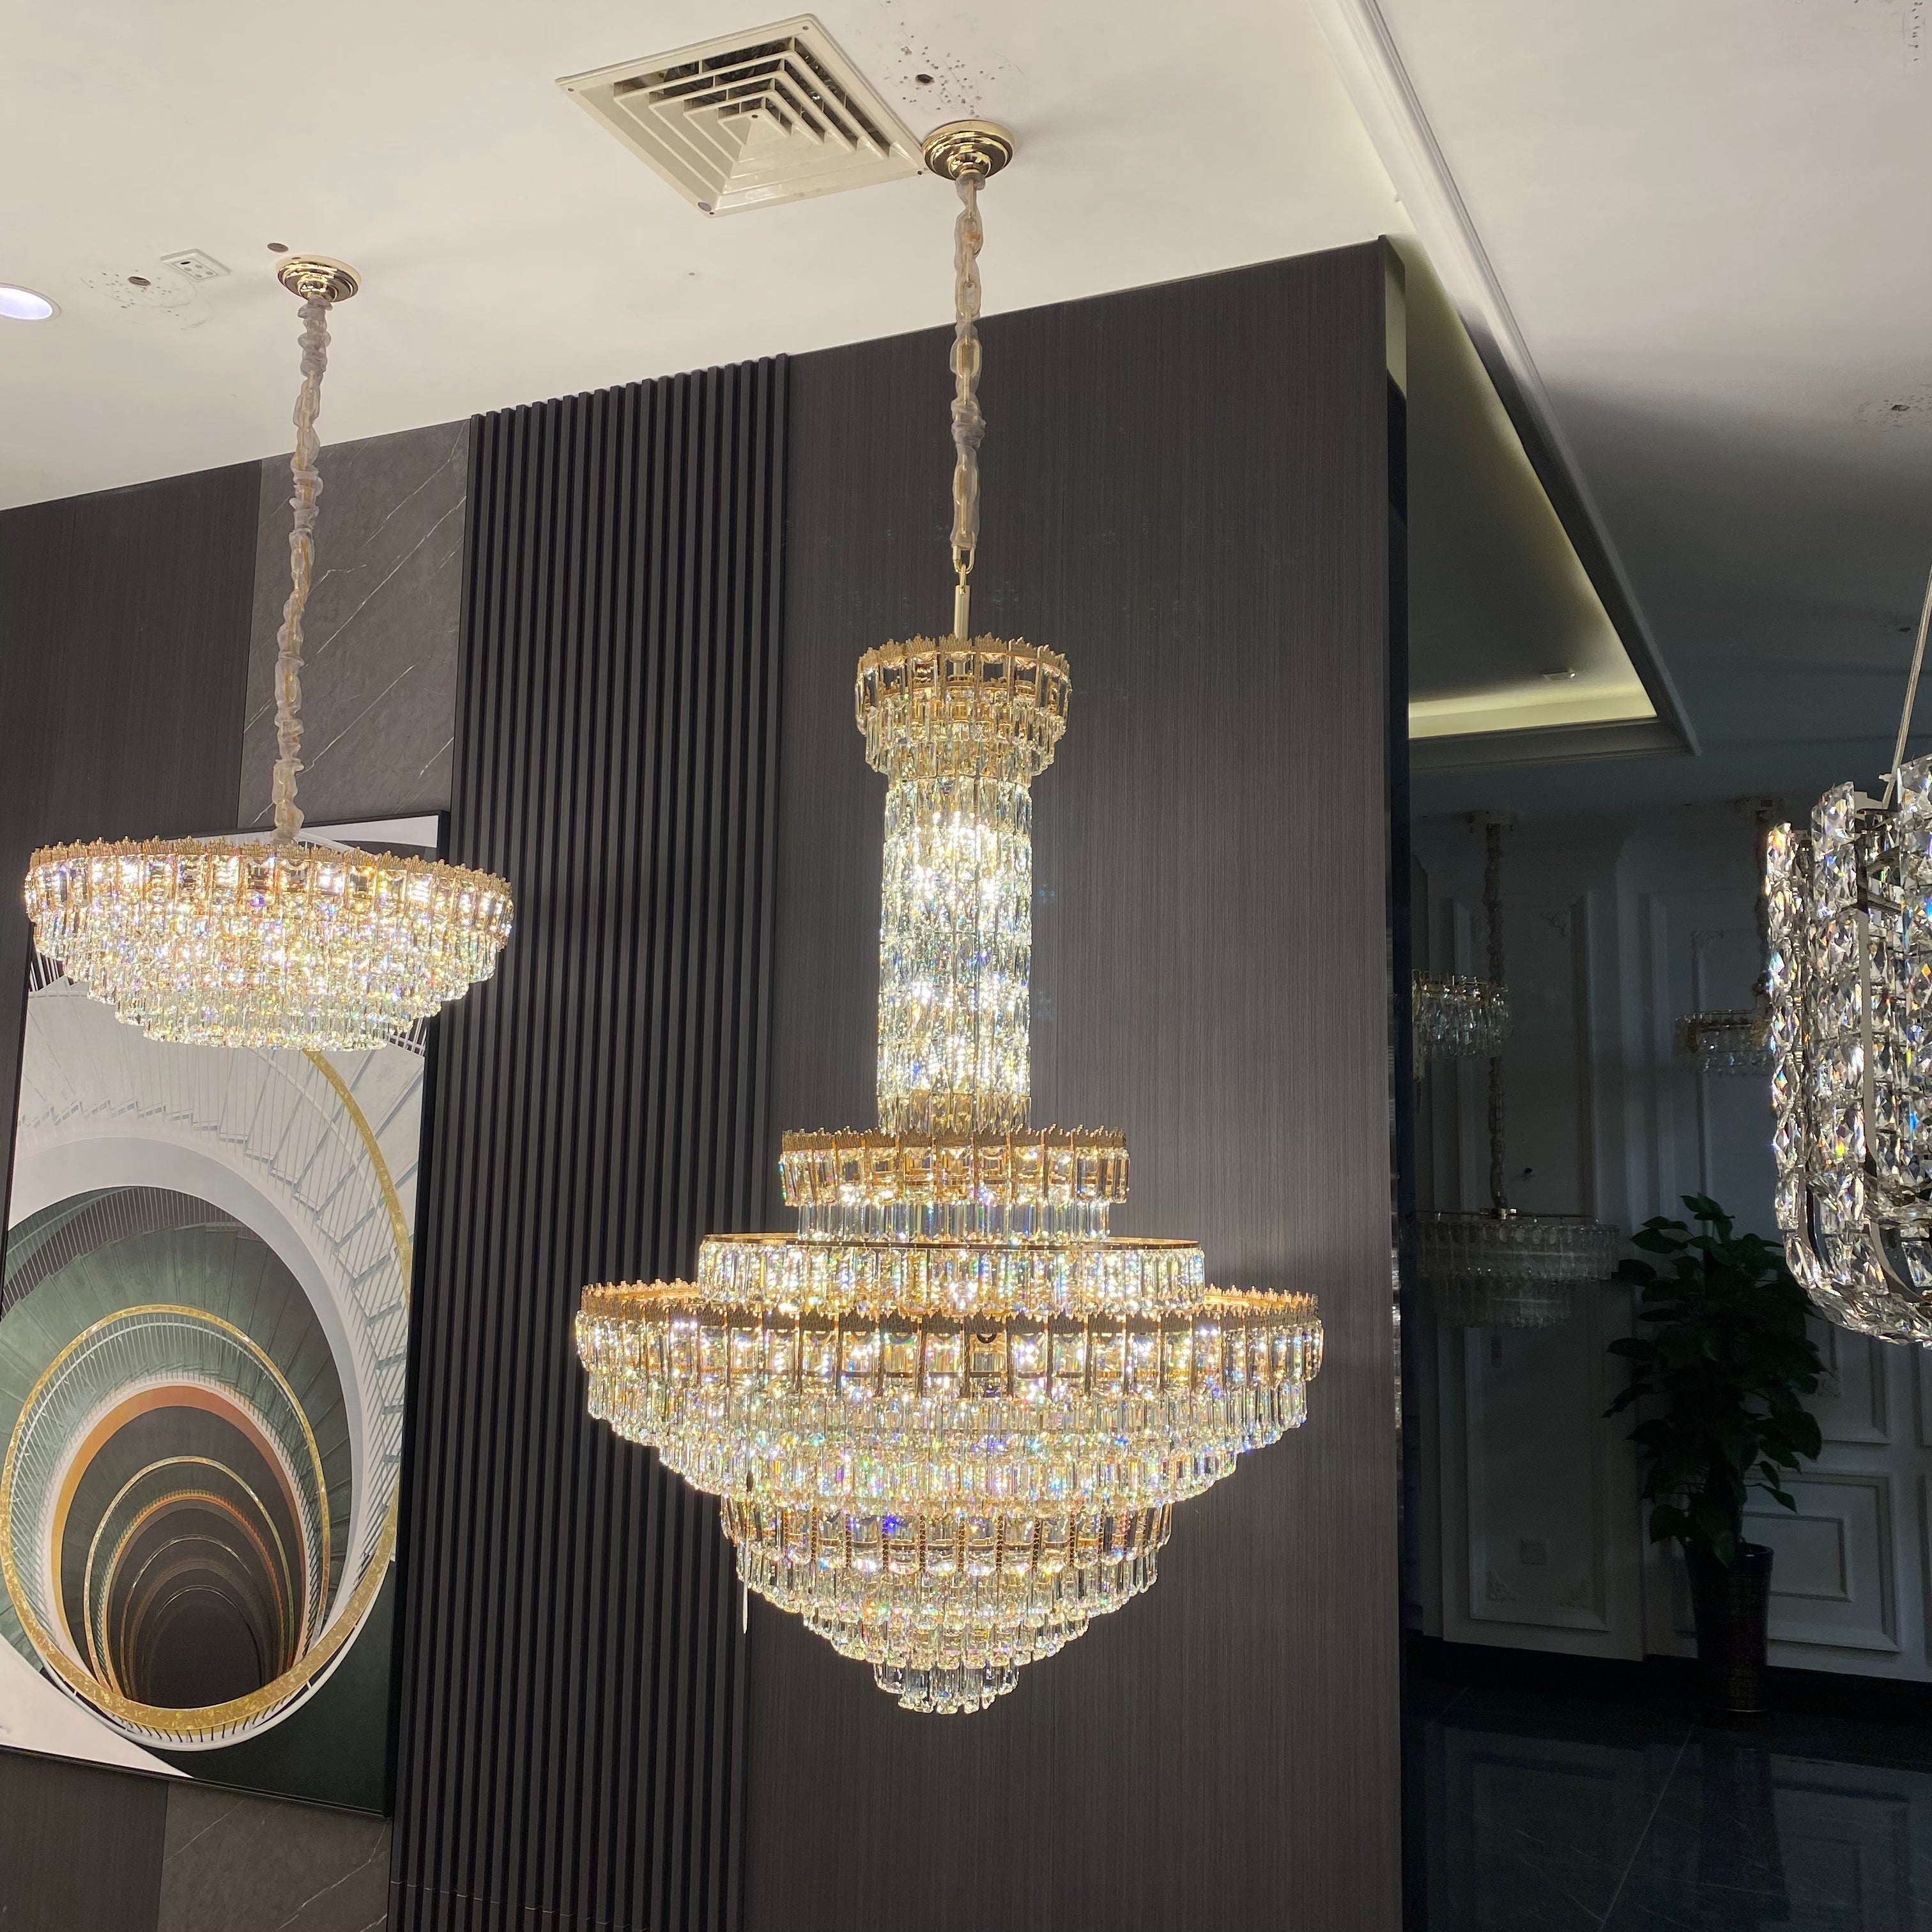 Modern Luxury Empire Crystal Chandelier For High Ceiling Living Room,Staircase